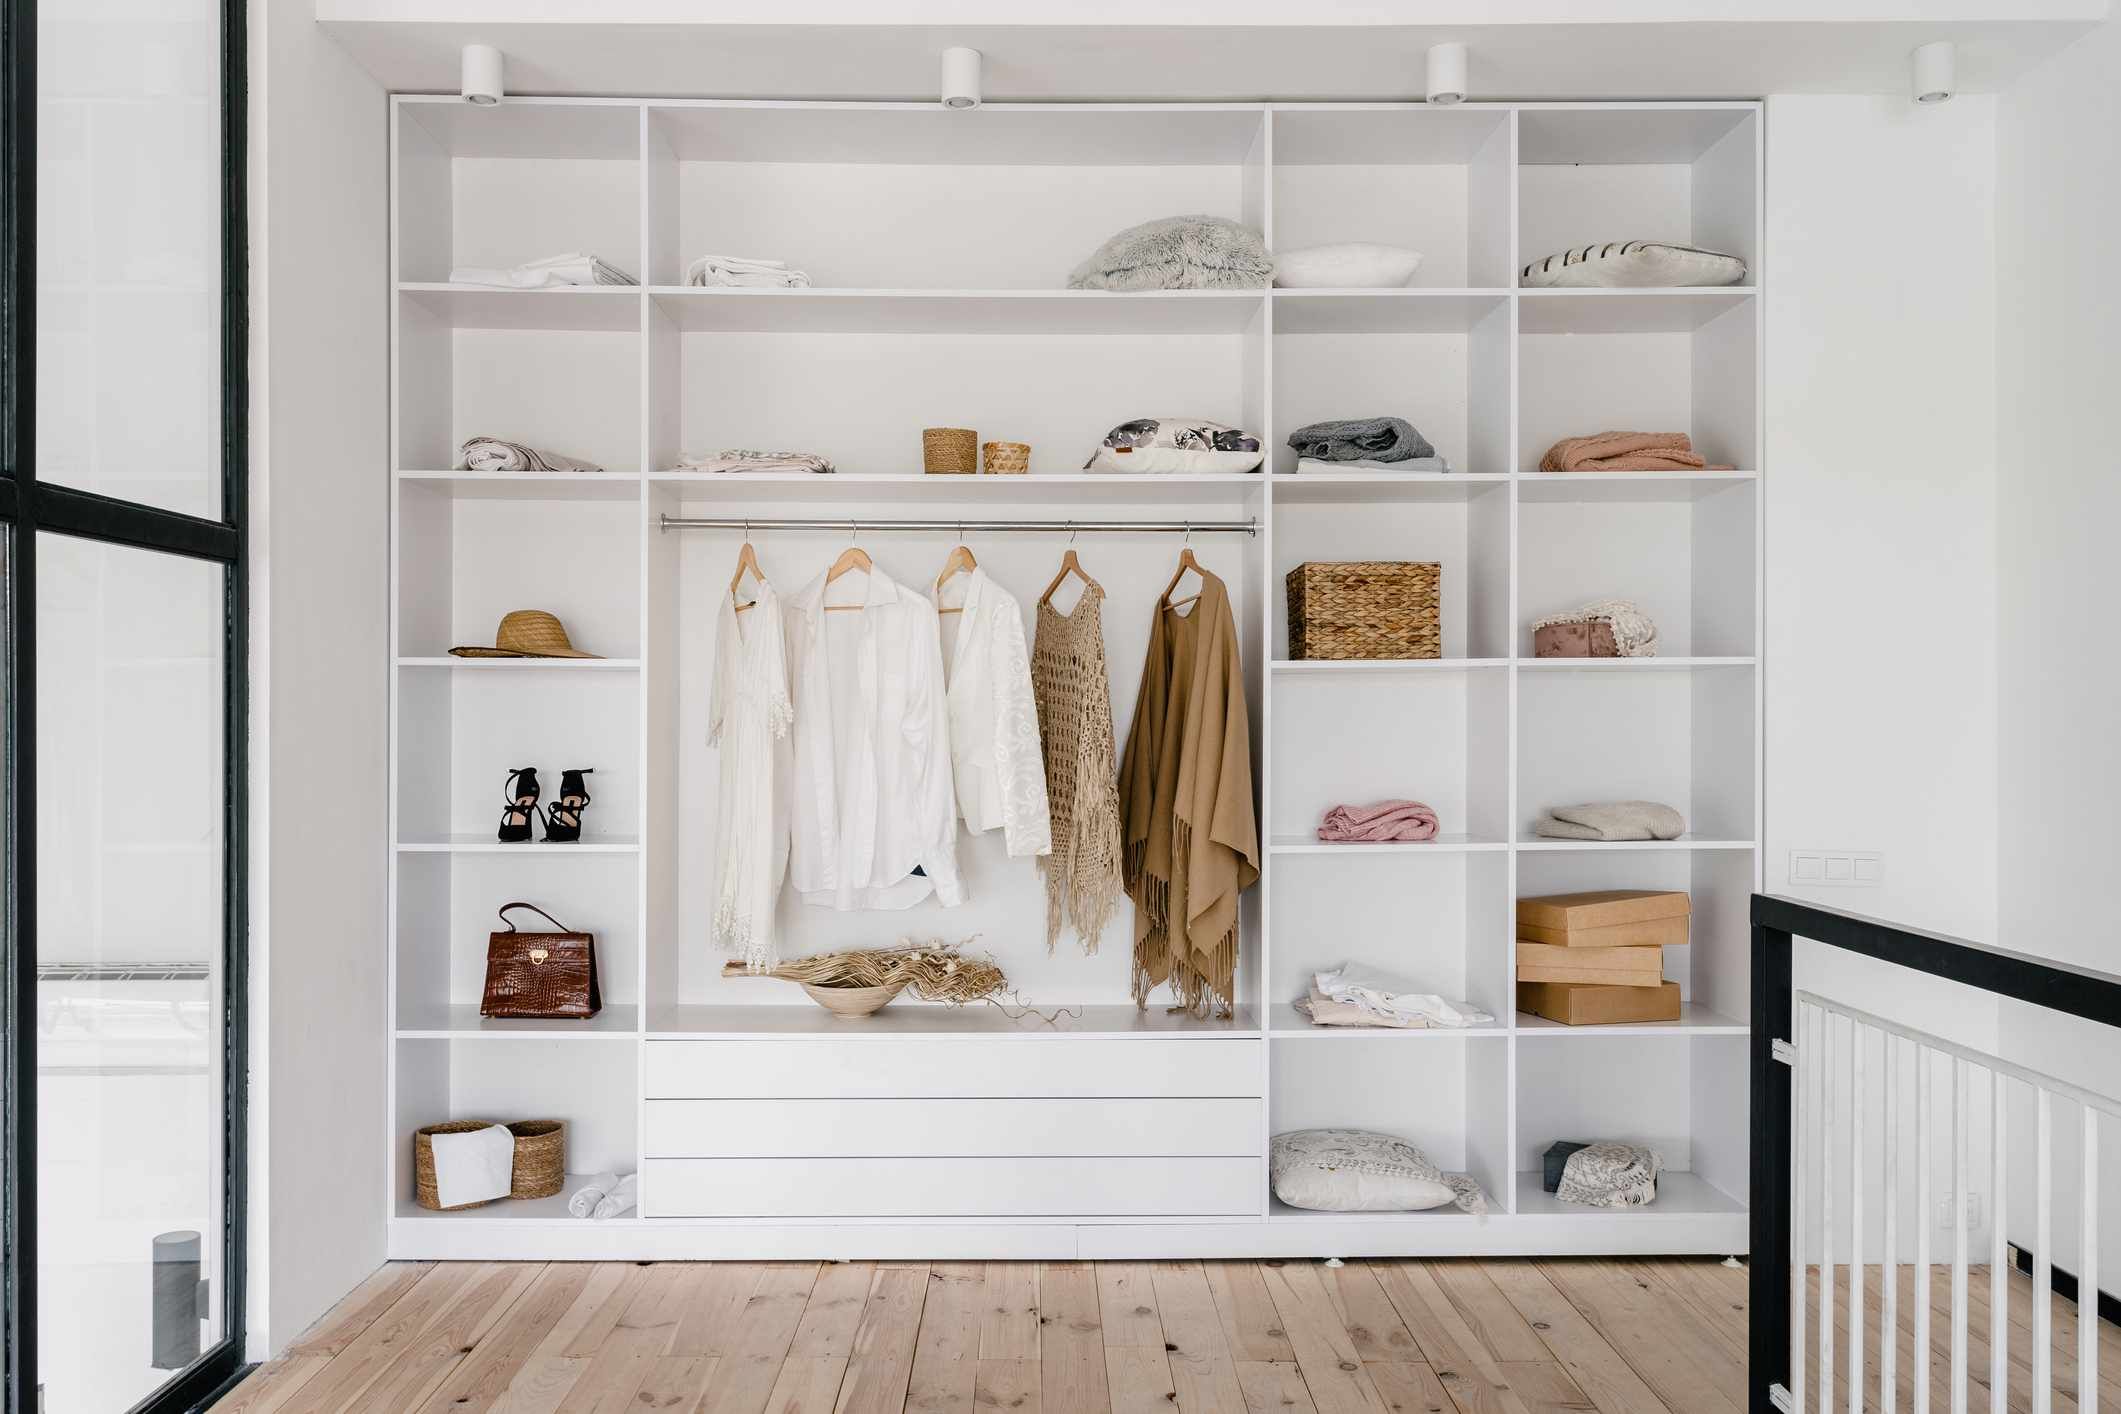 18 Open Closet Ideas To Make Getting Dressed A Cinch Pertaining To Wardrobe With Shelves (View 2 of 15)